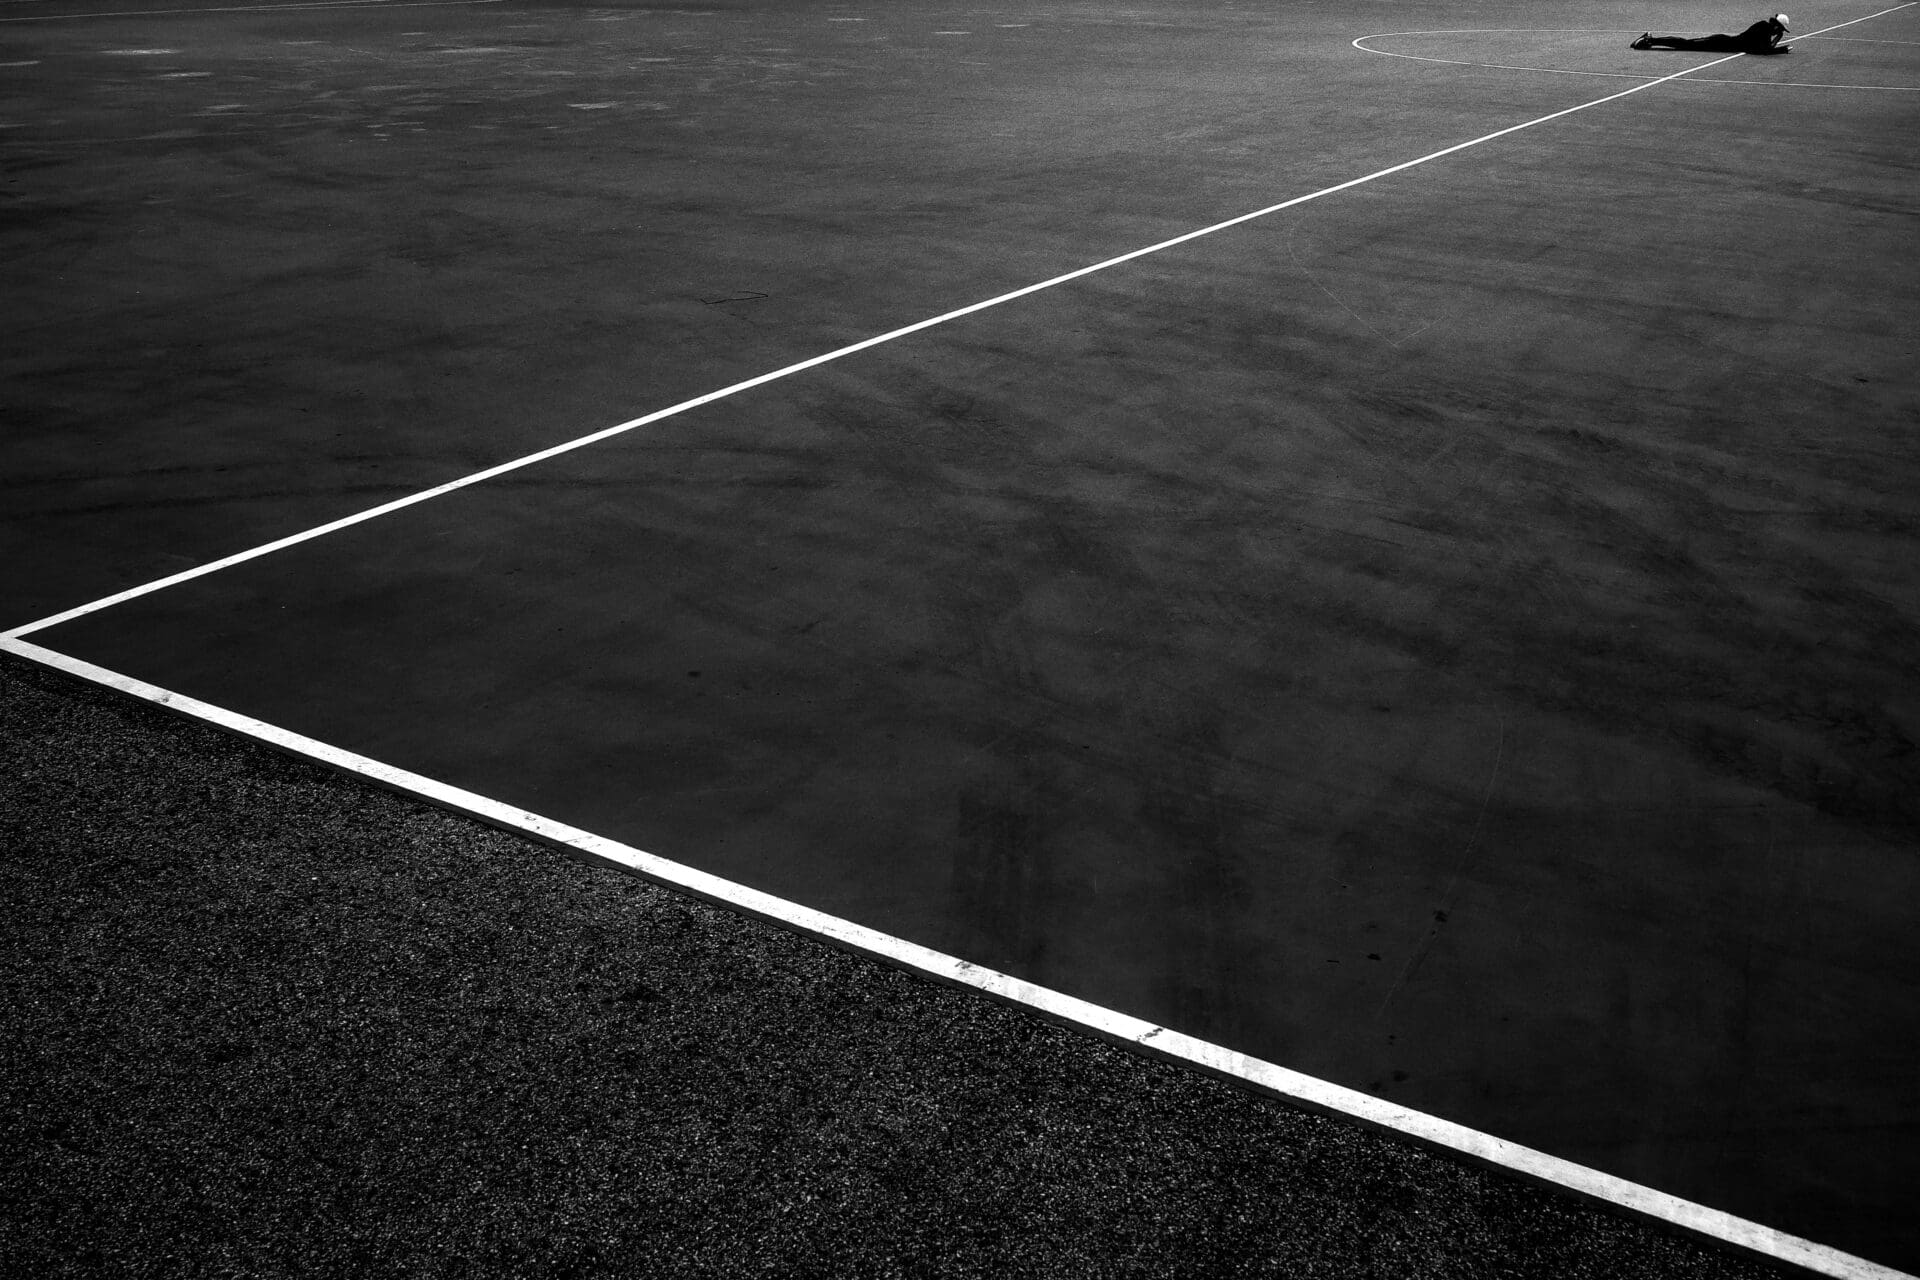 Jason Au | In Hong Kong's Victoria Park, a very prominent L-shaped marking on a football pitch is pointing towards a relaxed guy lying at the centre circle